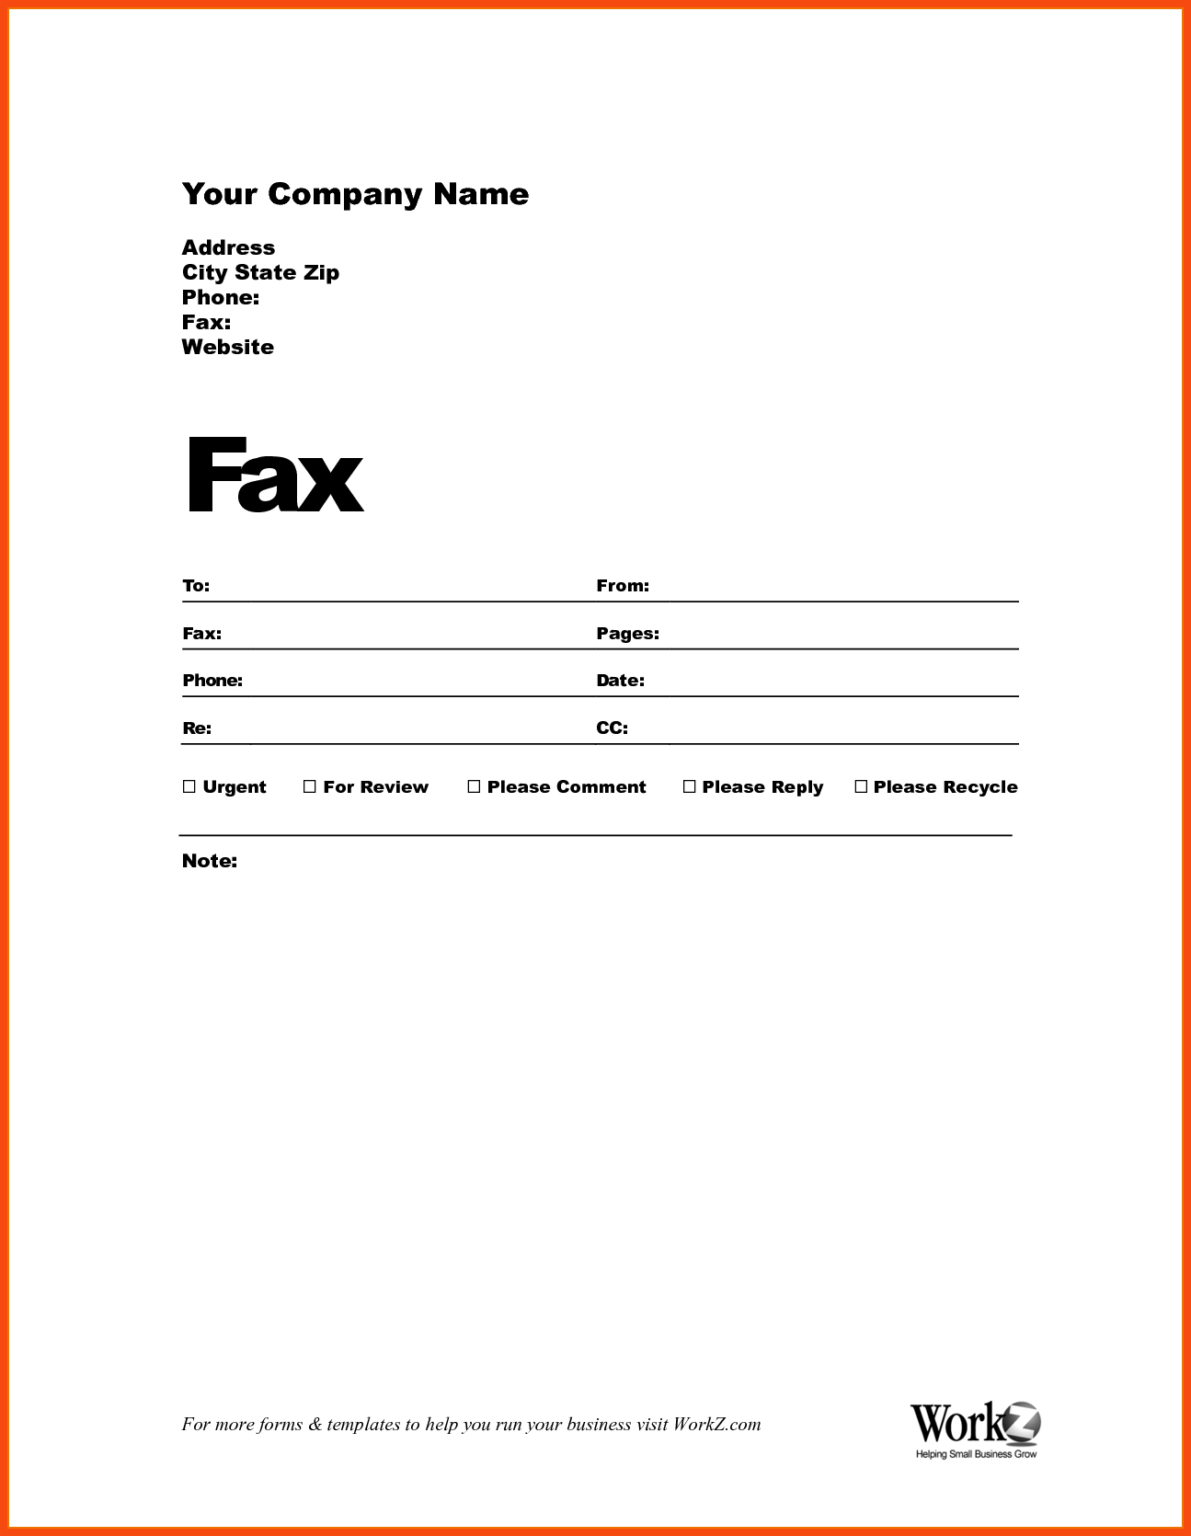 microsoft-word-fax-cover-sheet-free-fax-cover-sheet-template-download